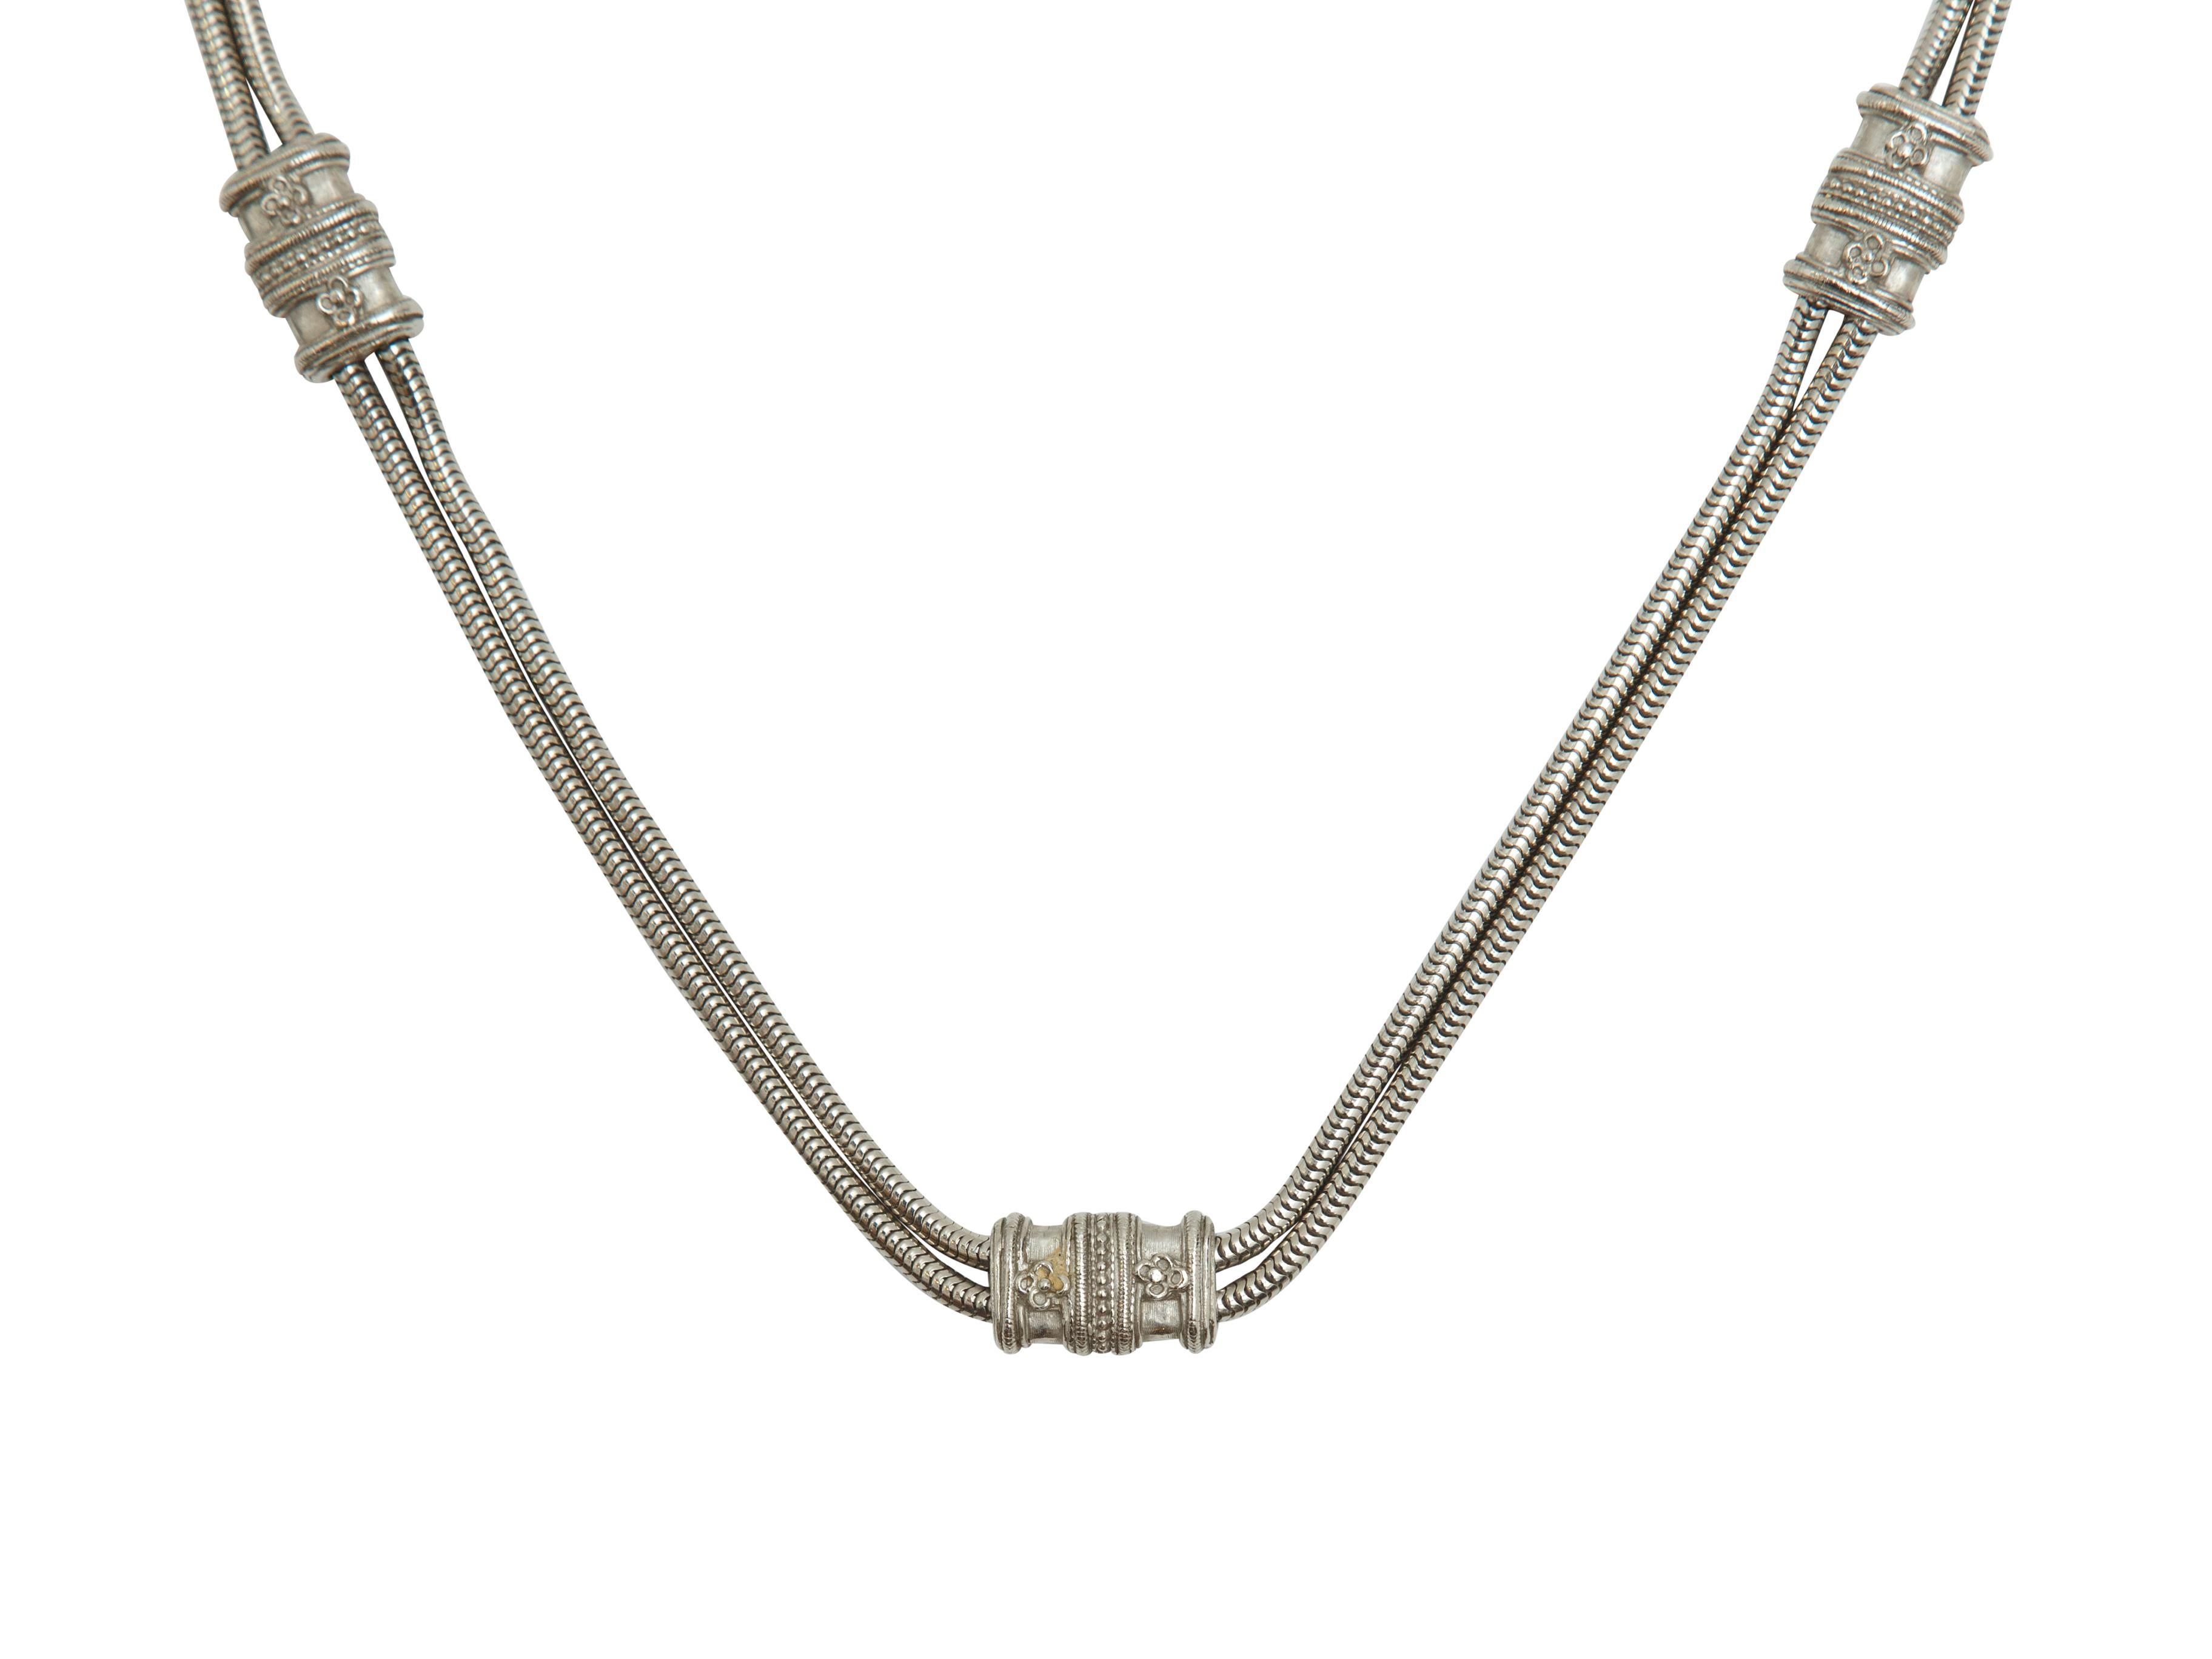 Product details: Vintage silver waist belt by Judith Leiber. Intricate detailing throughout. 32